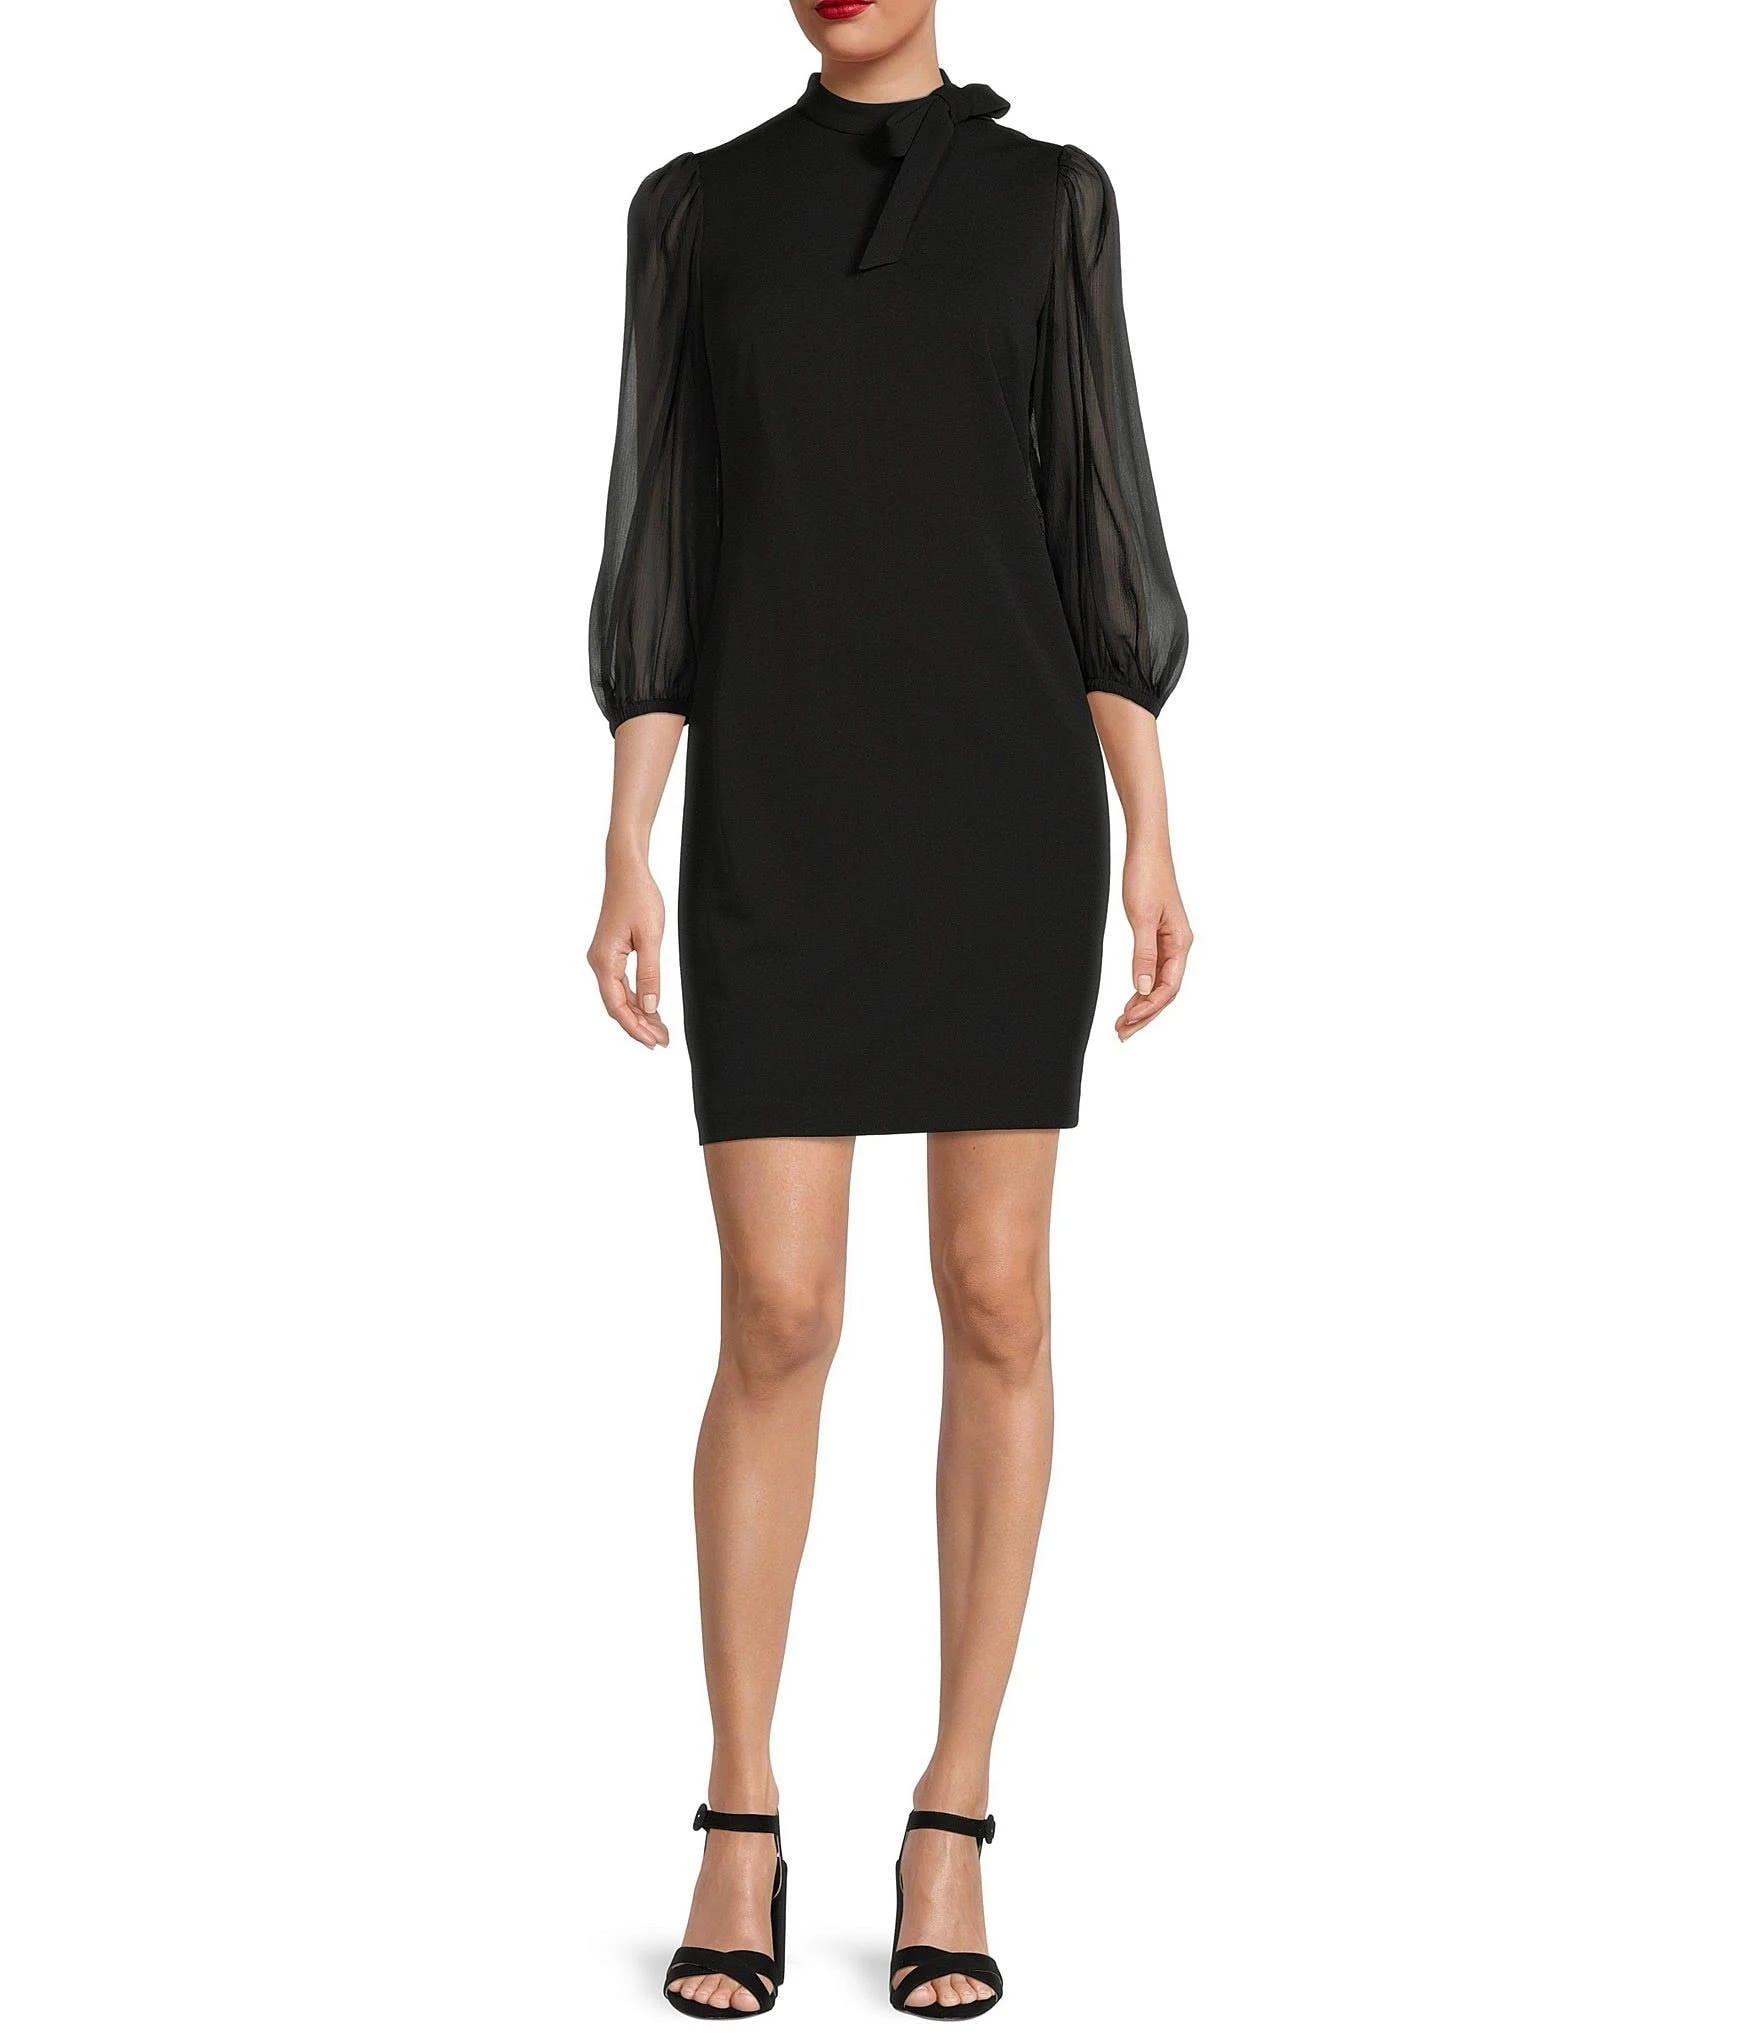 Chic Puff-Sleeve Black Cocktail Dress by Calvin Klein | Image